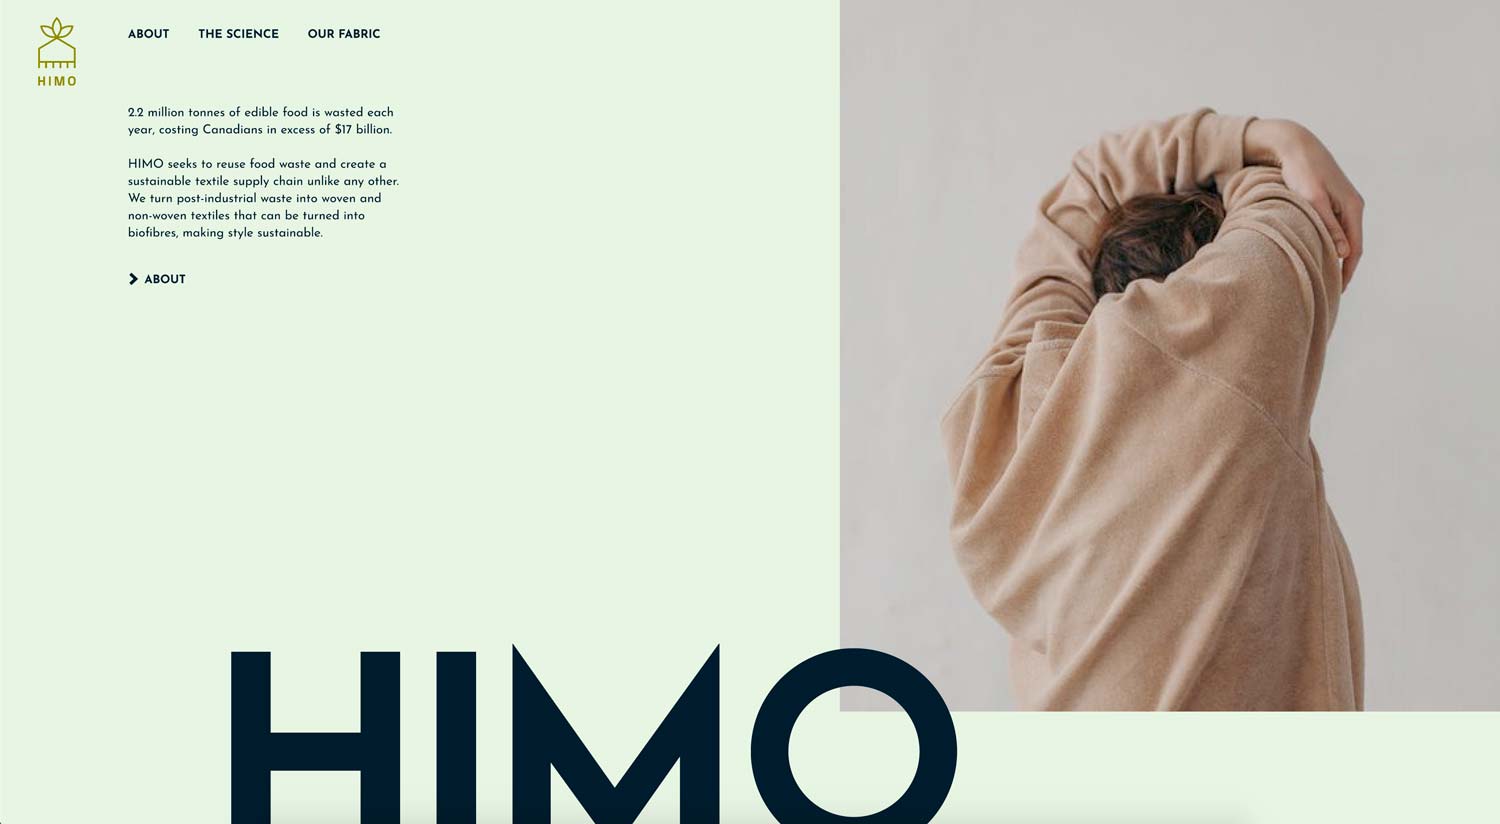 The home page of HIMO.